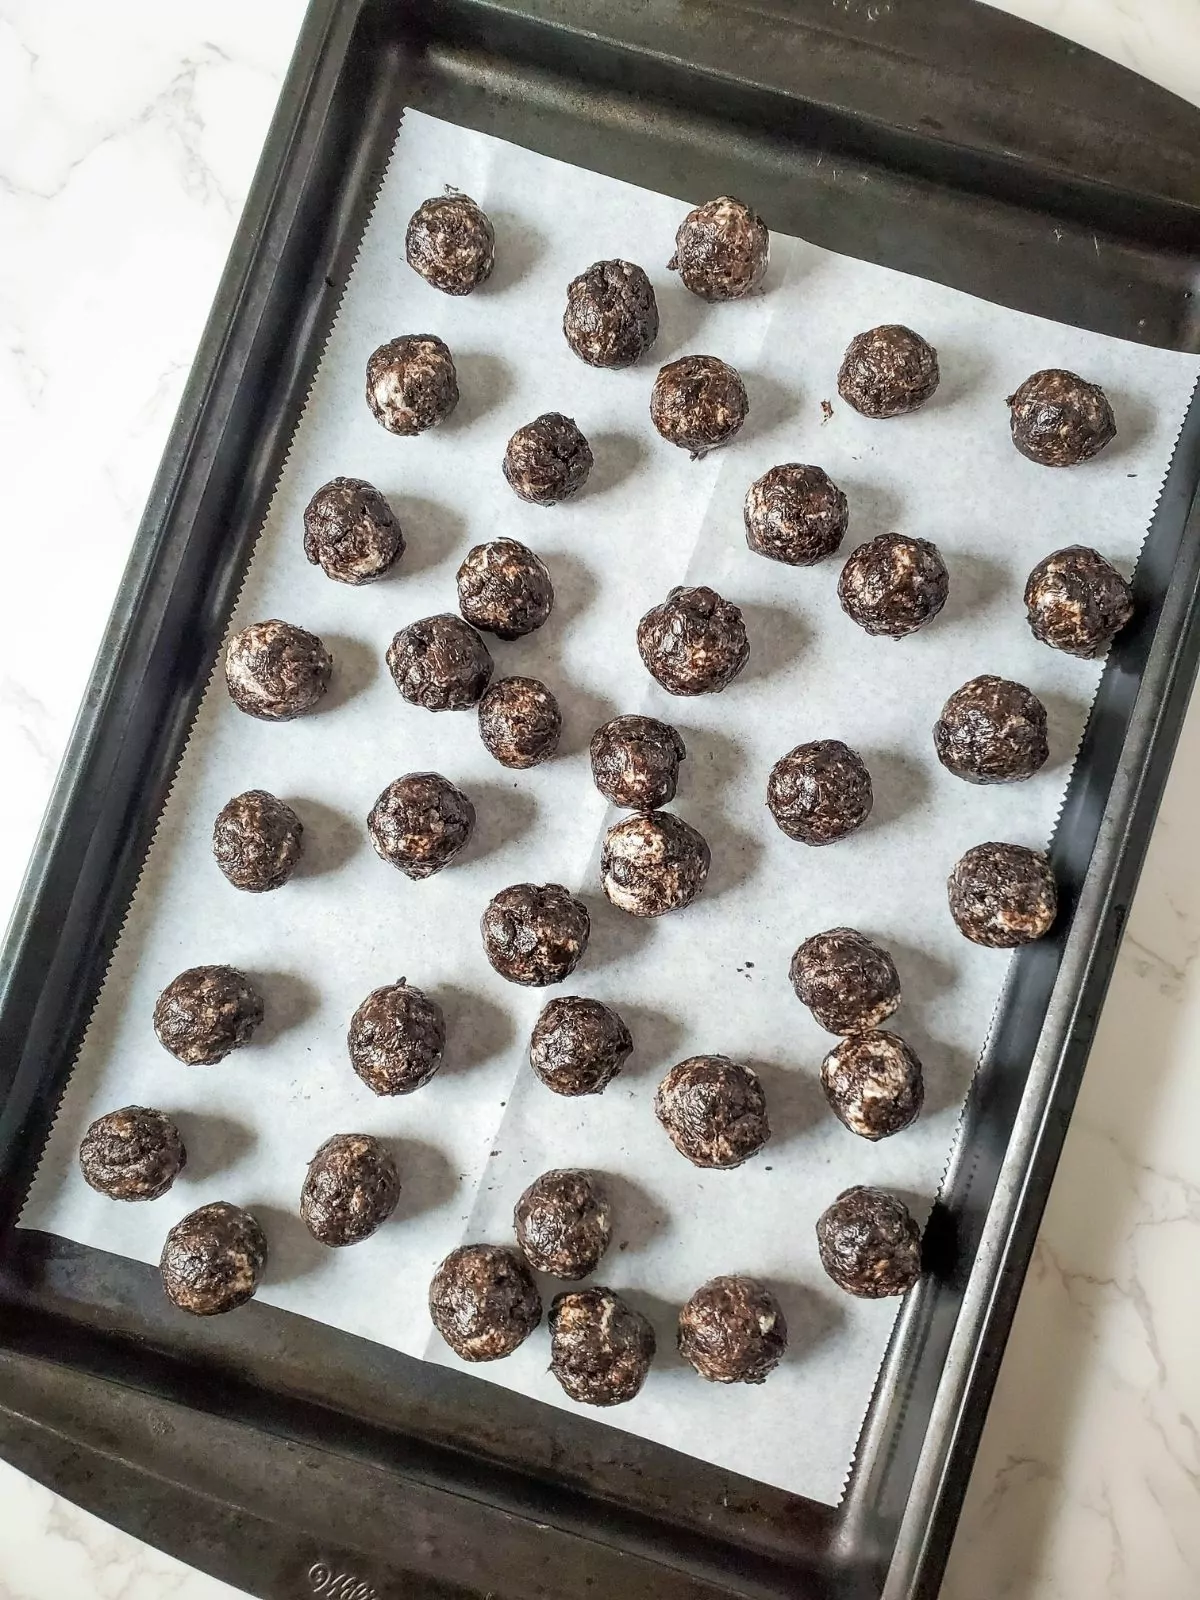 Oreo and Cream cheese cookie balls on baking tray.